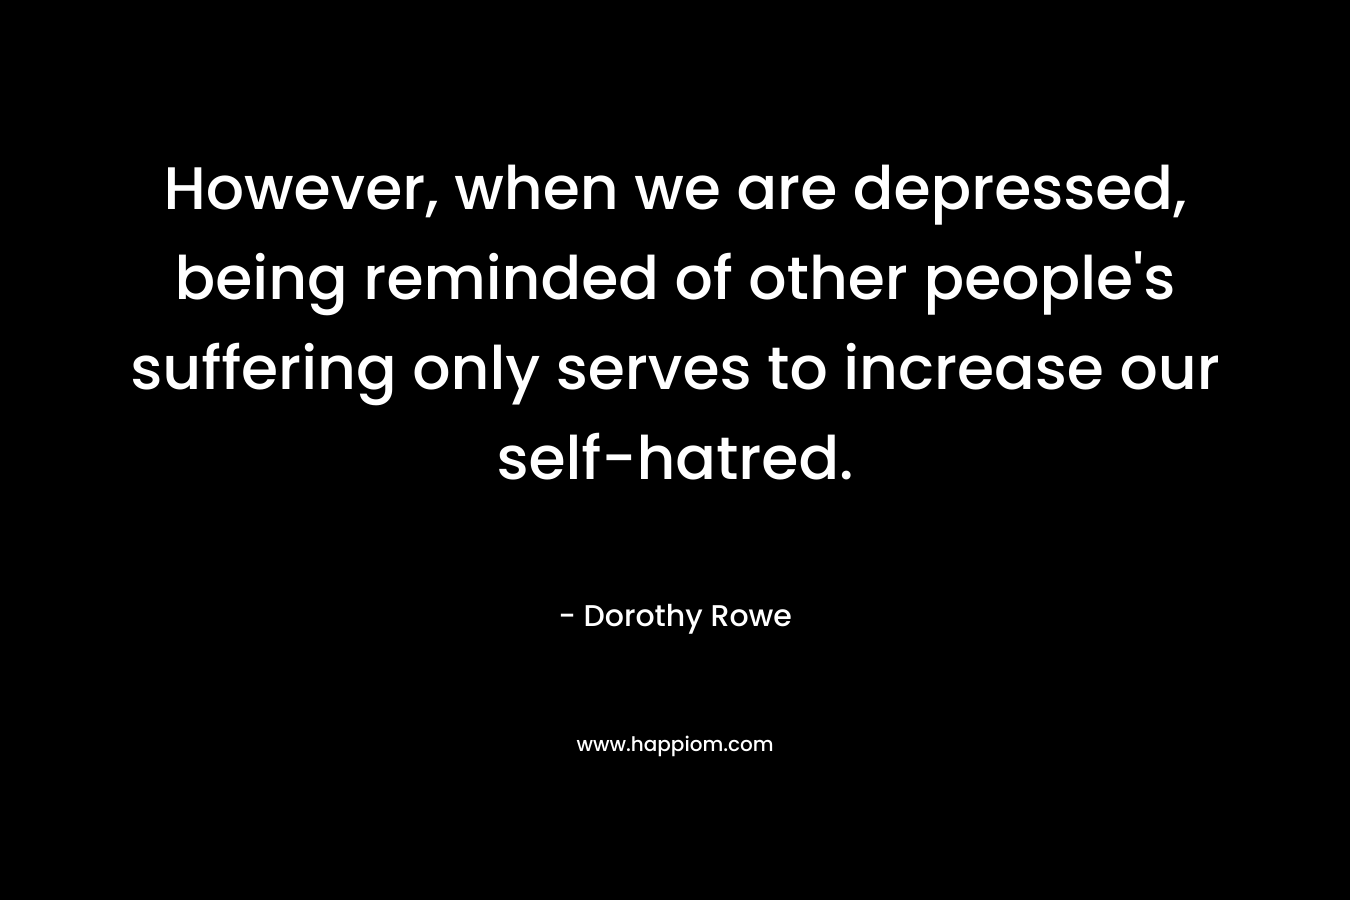 However, when we are depressed, being reminded of other people’s suffering only serves to increase our self-hatred. – Dorothy Rowe